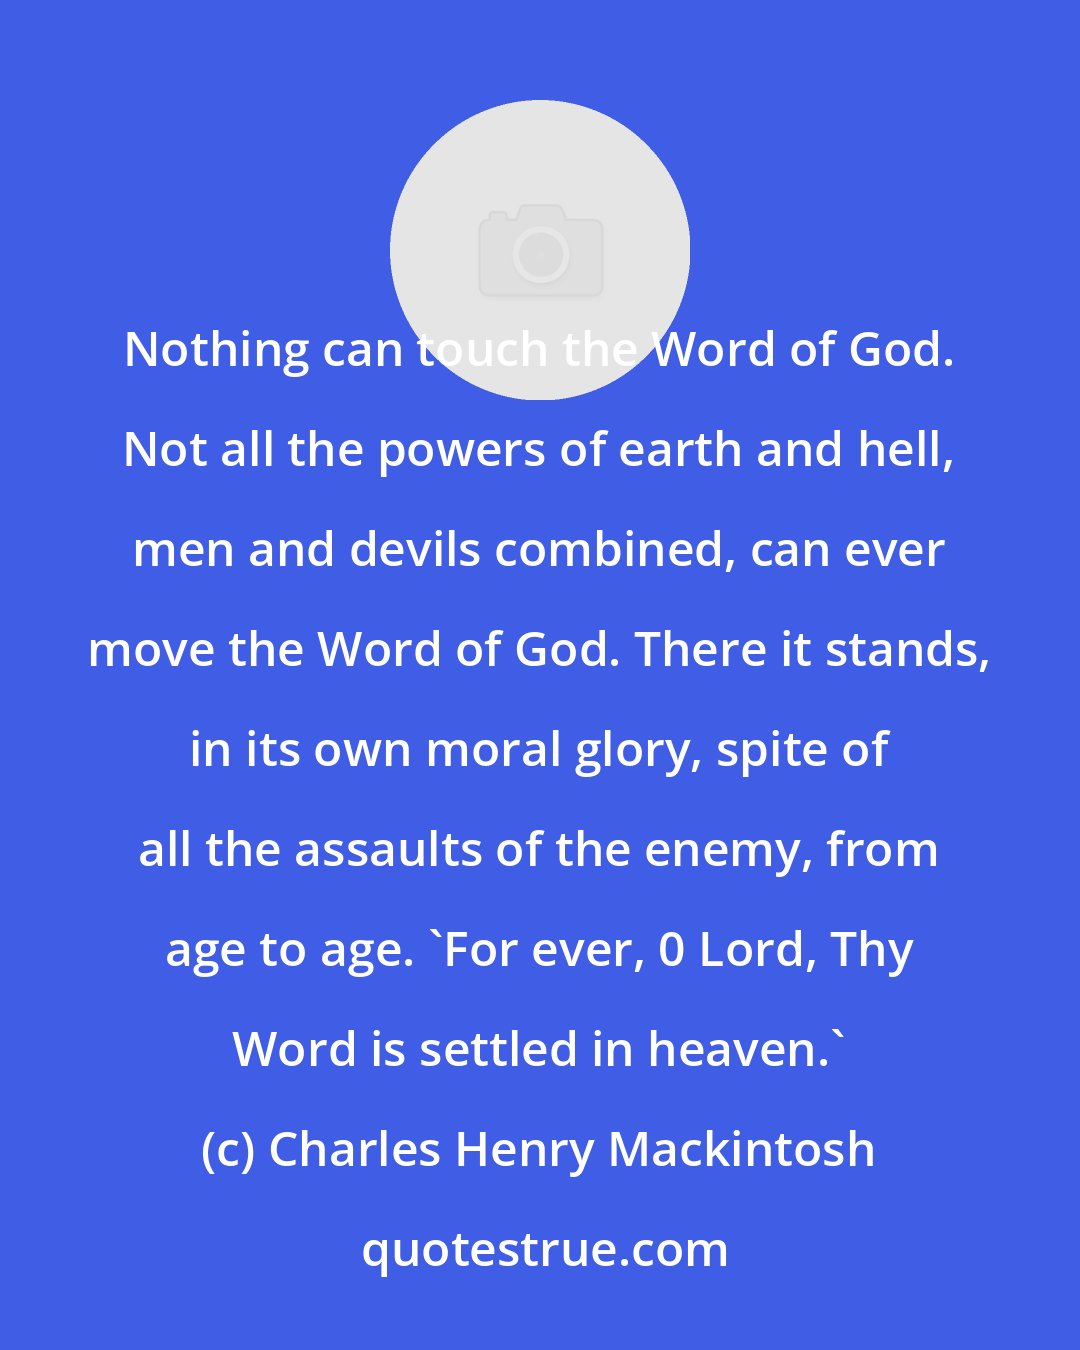 Charles Henry Mackintosh: Nothing can touch the Word of God. Not all the powers of earth and hell, men and devils combined, can ever move the Word of God. There it stands, in its own moral glory, spite of all the assaults of the enemy, from age to age. 'For ever, 0 Lord, Thy Word is settled in heaven.'